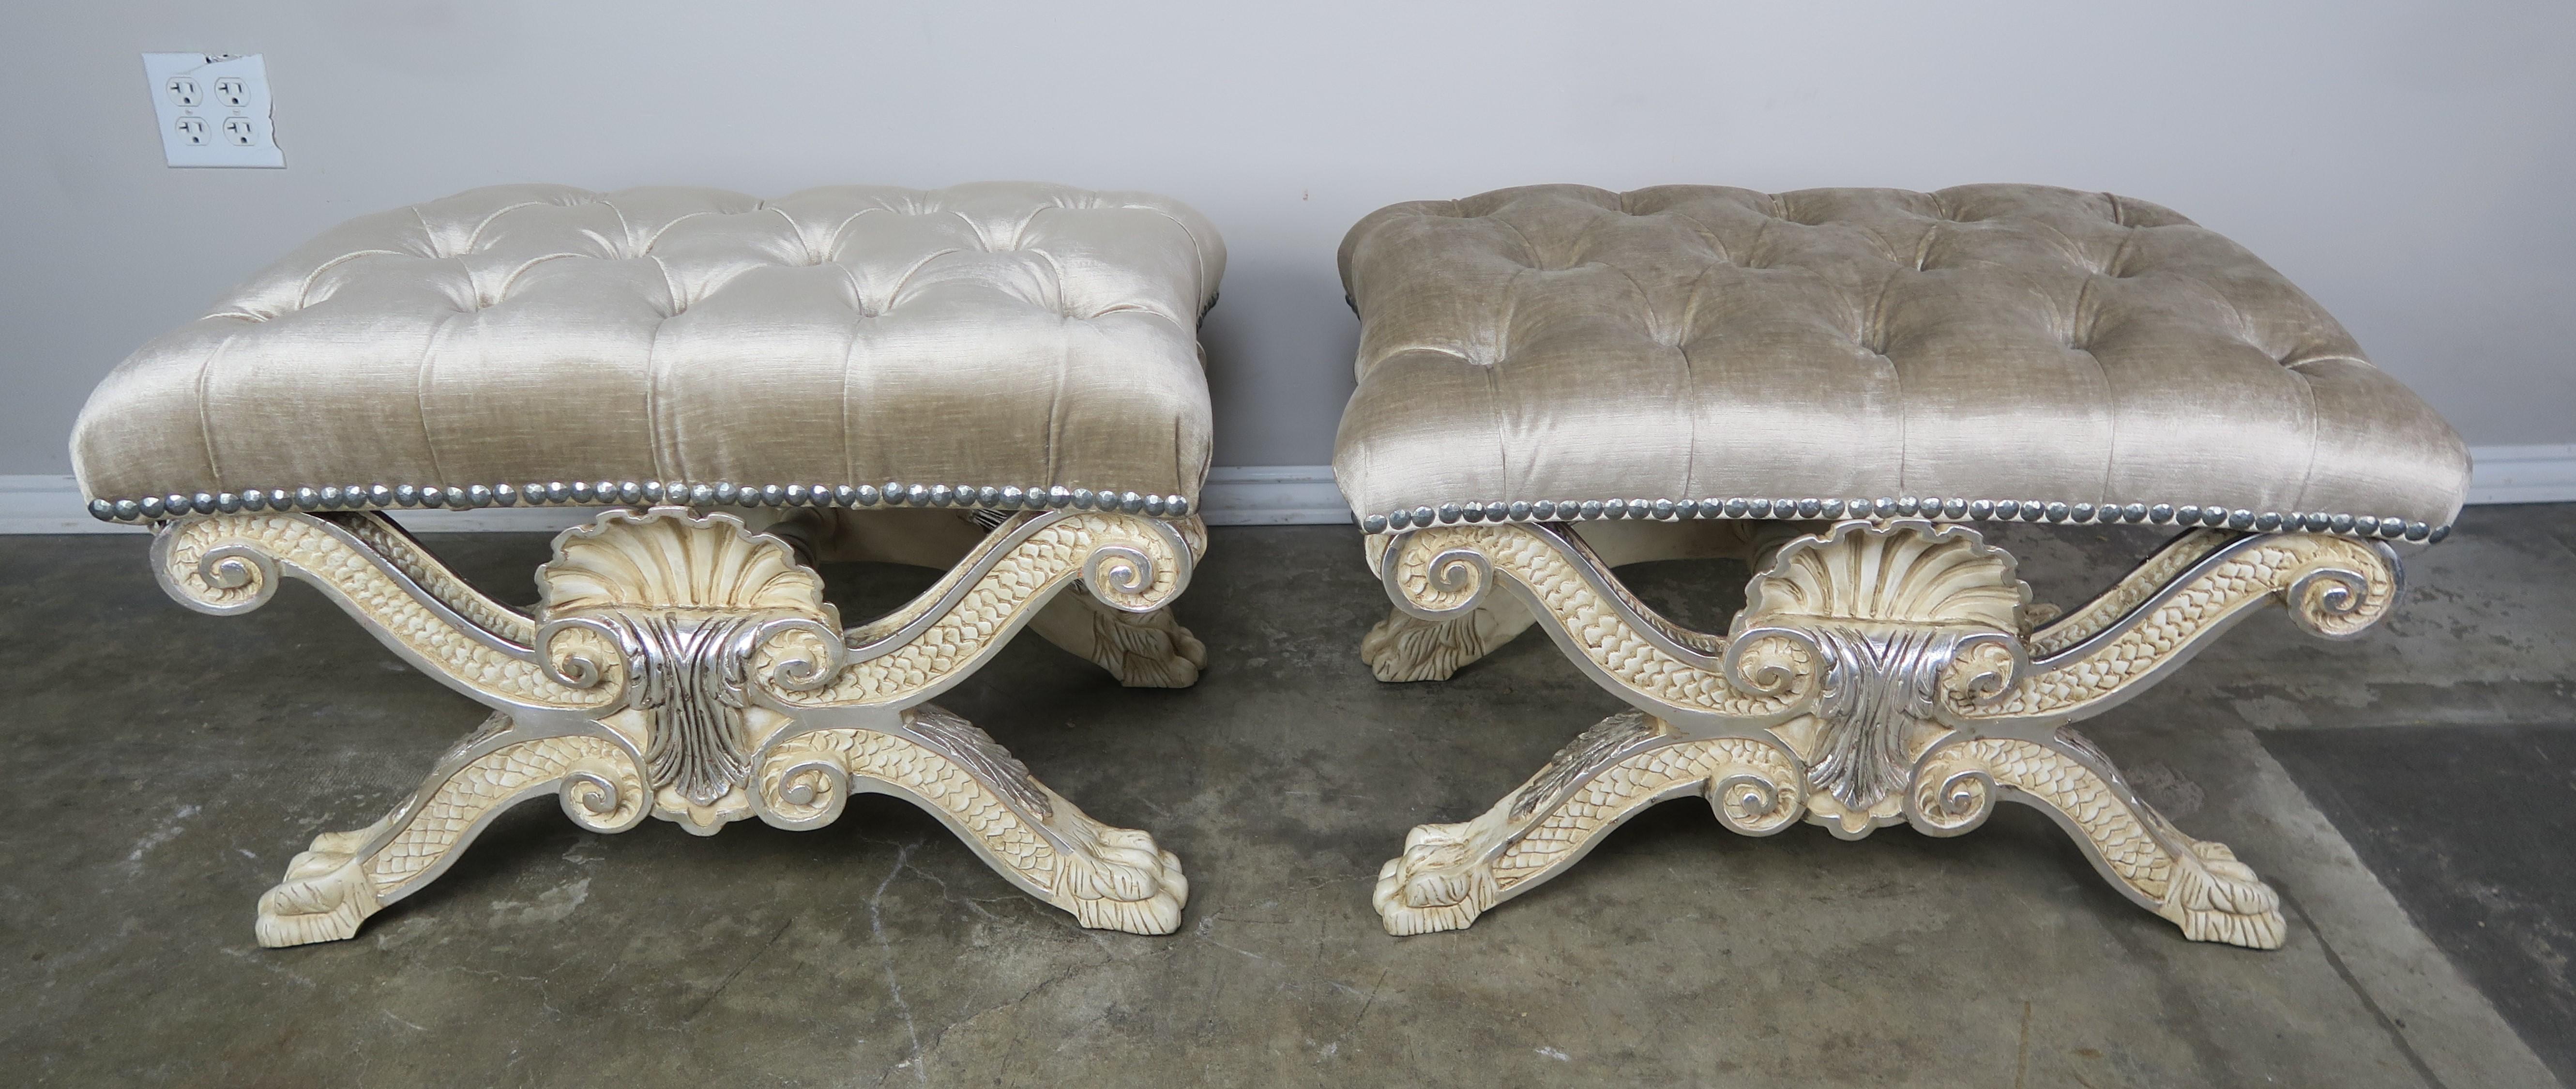 Pair of finely carved 